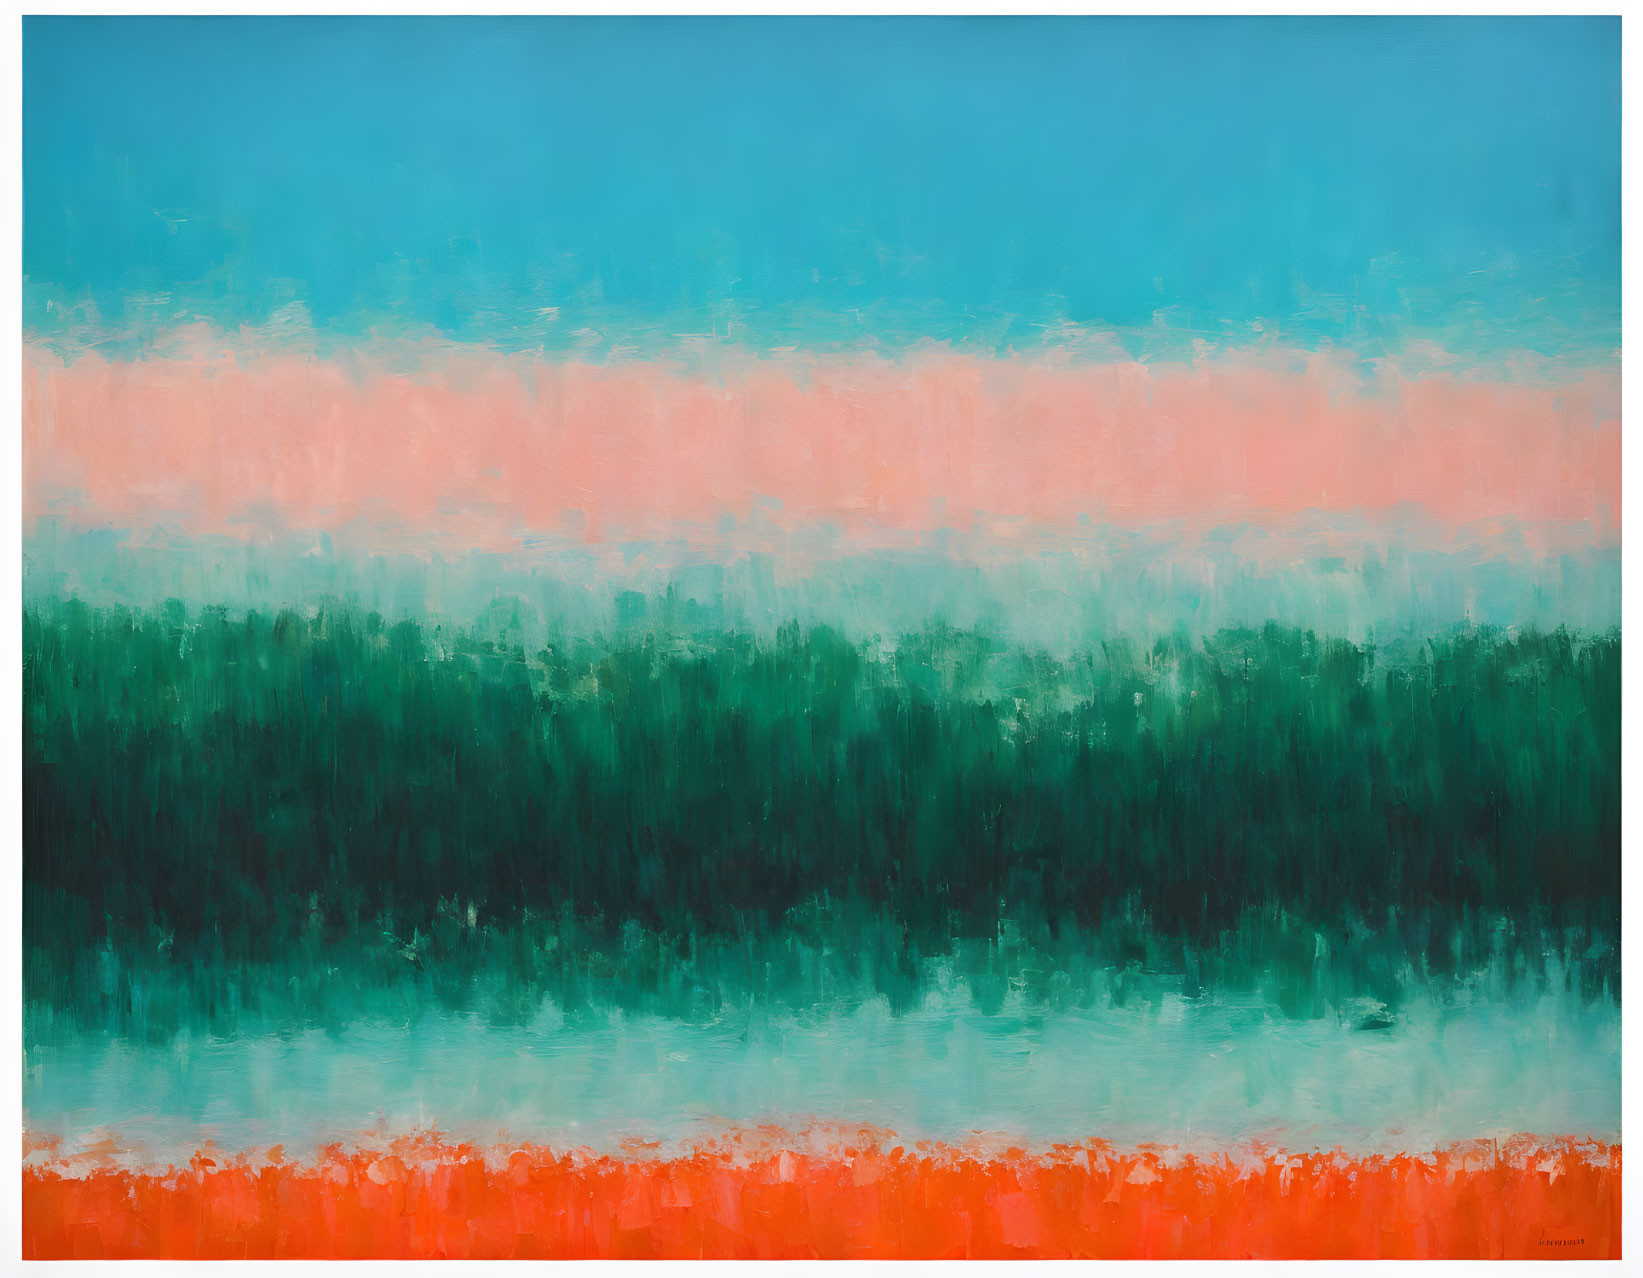 Horizontal Layered Abstract Painting in Blue, Pink, Green, and Red